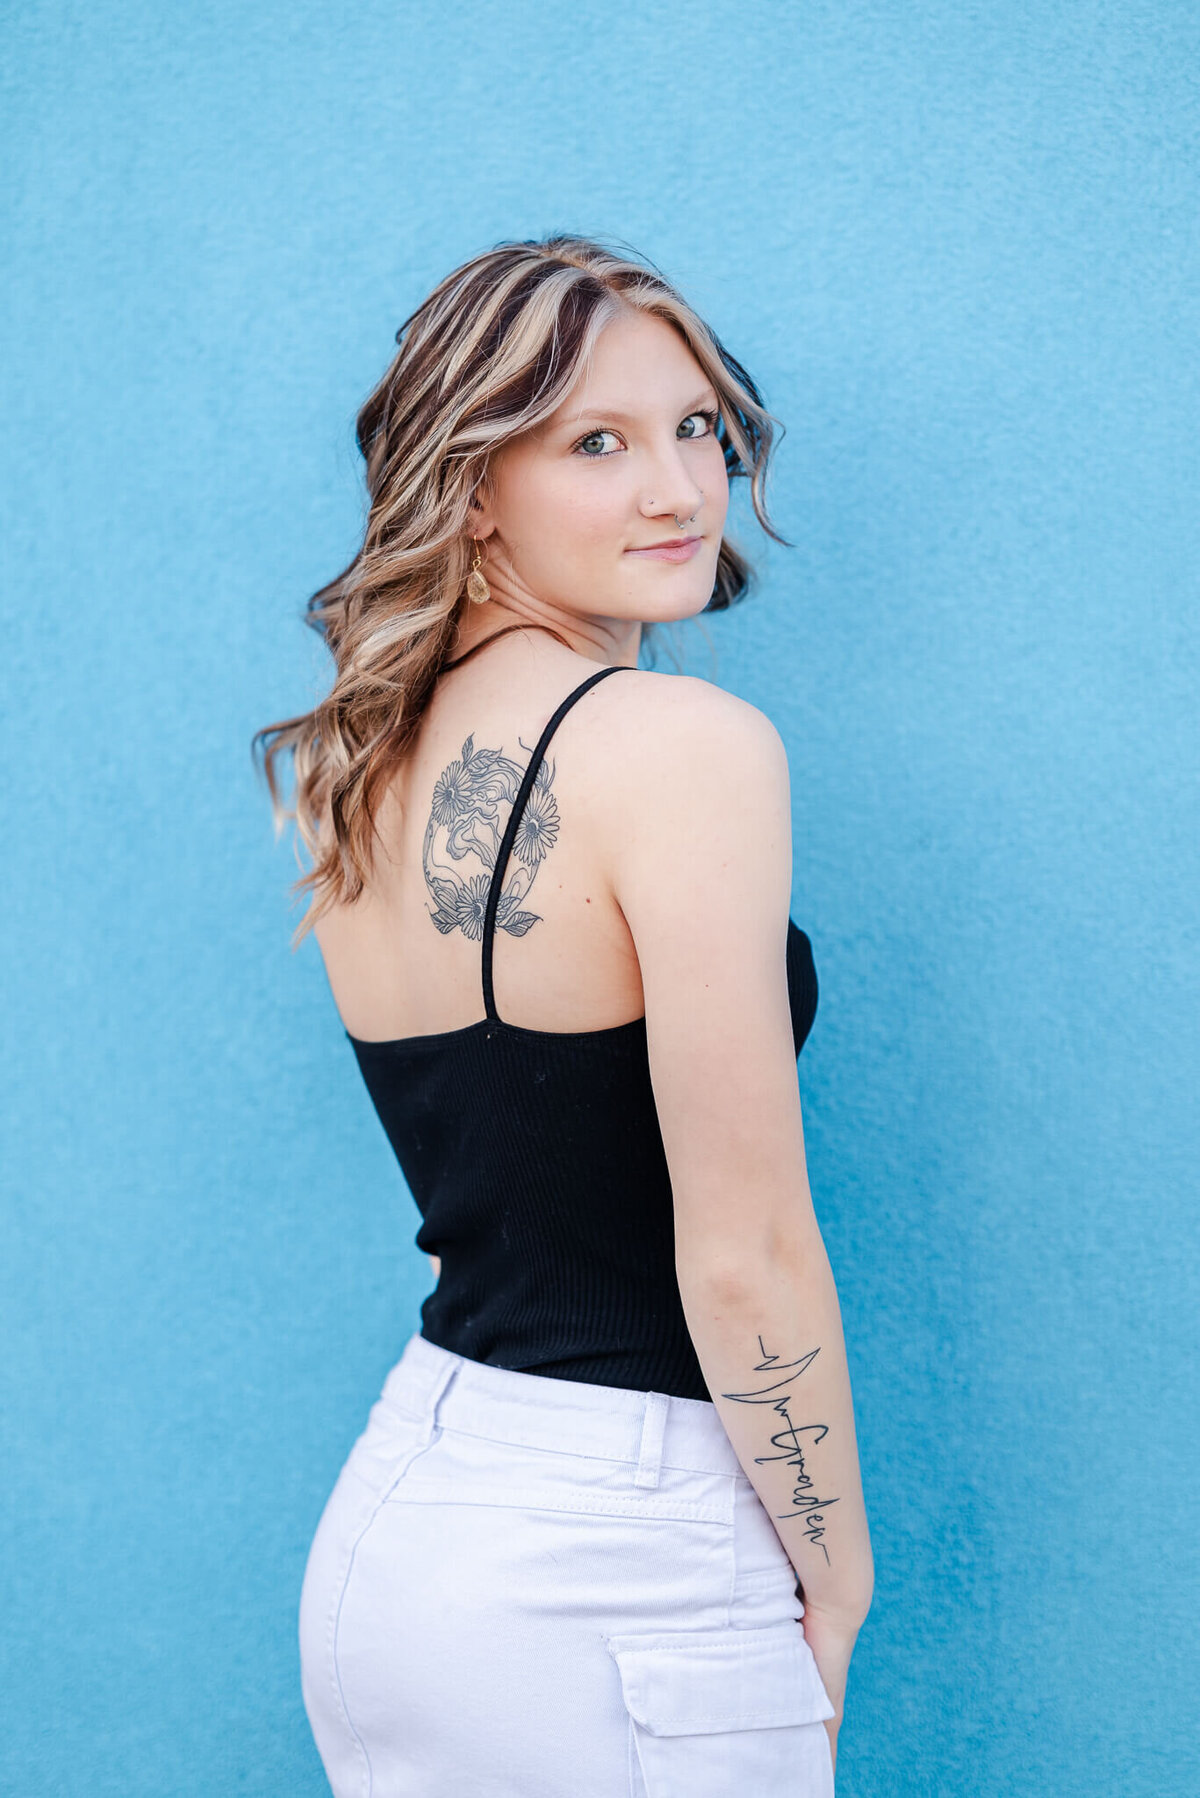 A high school senior, wearing a black top and white denim skirt, looks over her should. You can see the tattoos on her shoulder and arm. She is in front of a blue wall.